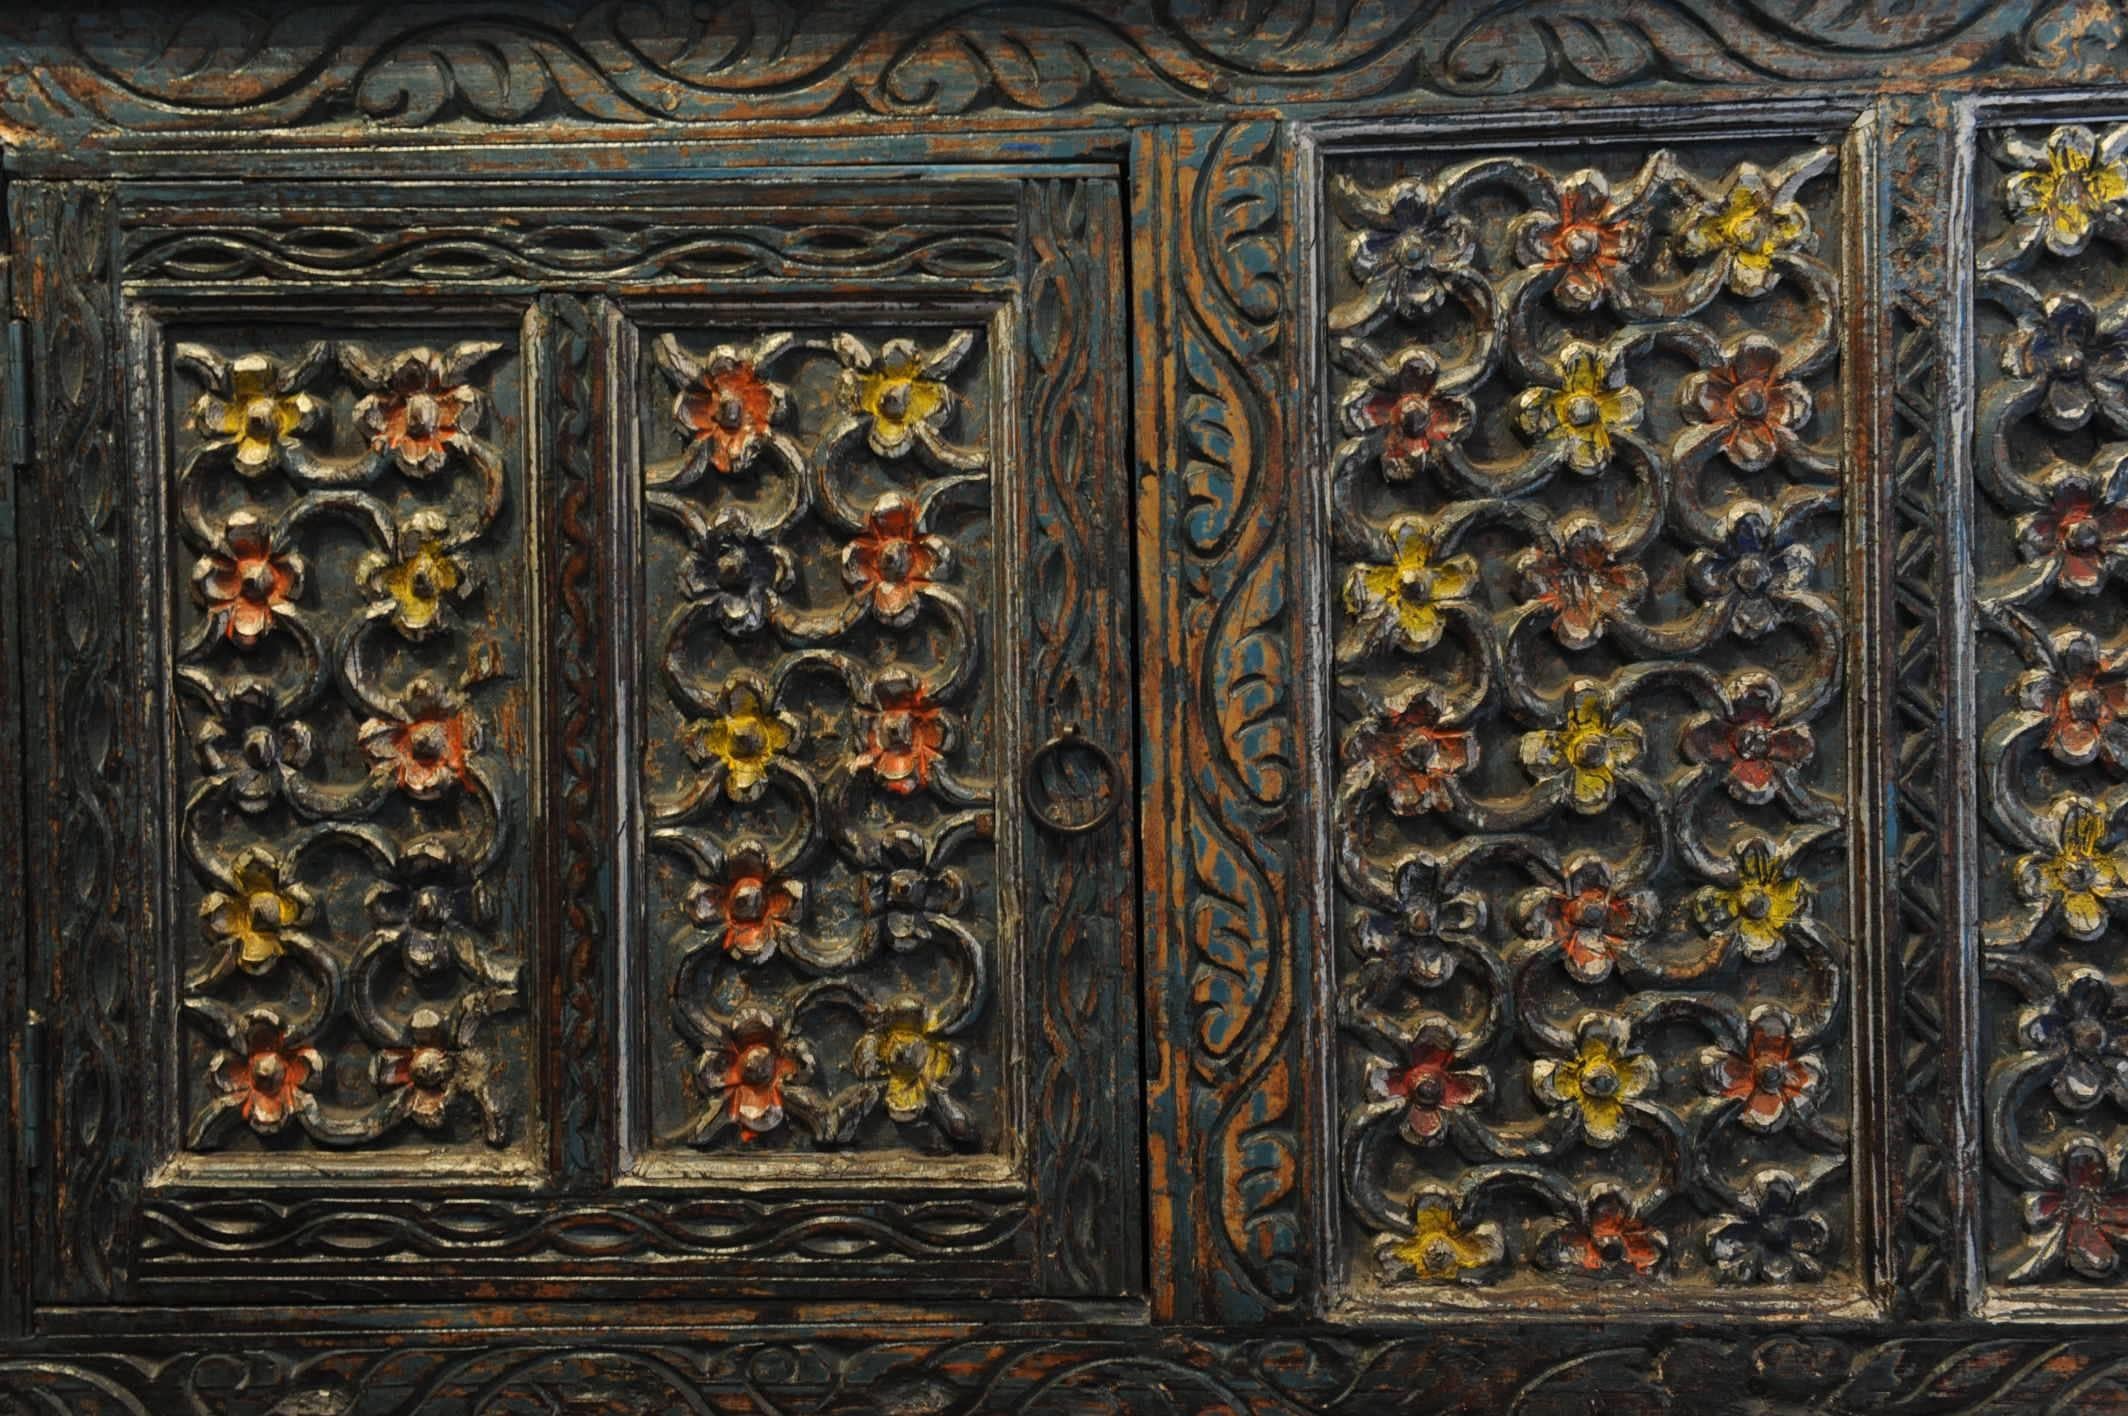 Intricately carved Indian teak sideboard with floral and vine motif and original paint. Centre opening with three lower drawers, late 19th century, Gujarat, India.